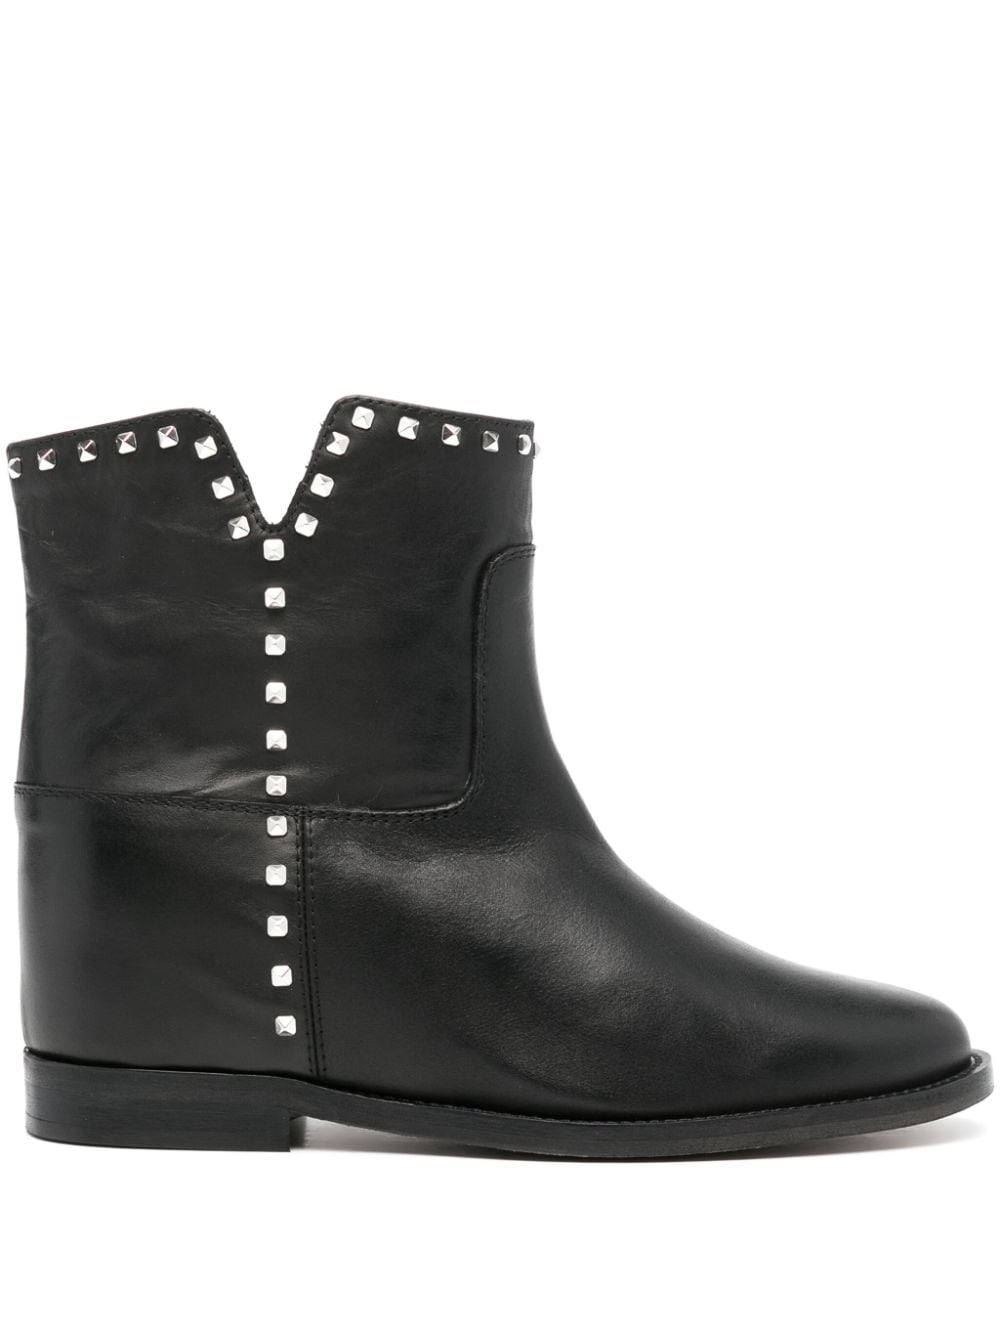 Image 1 of Via Roma 15 studded suede boots